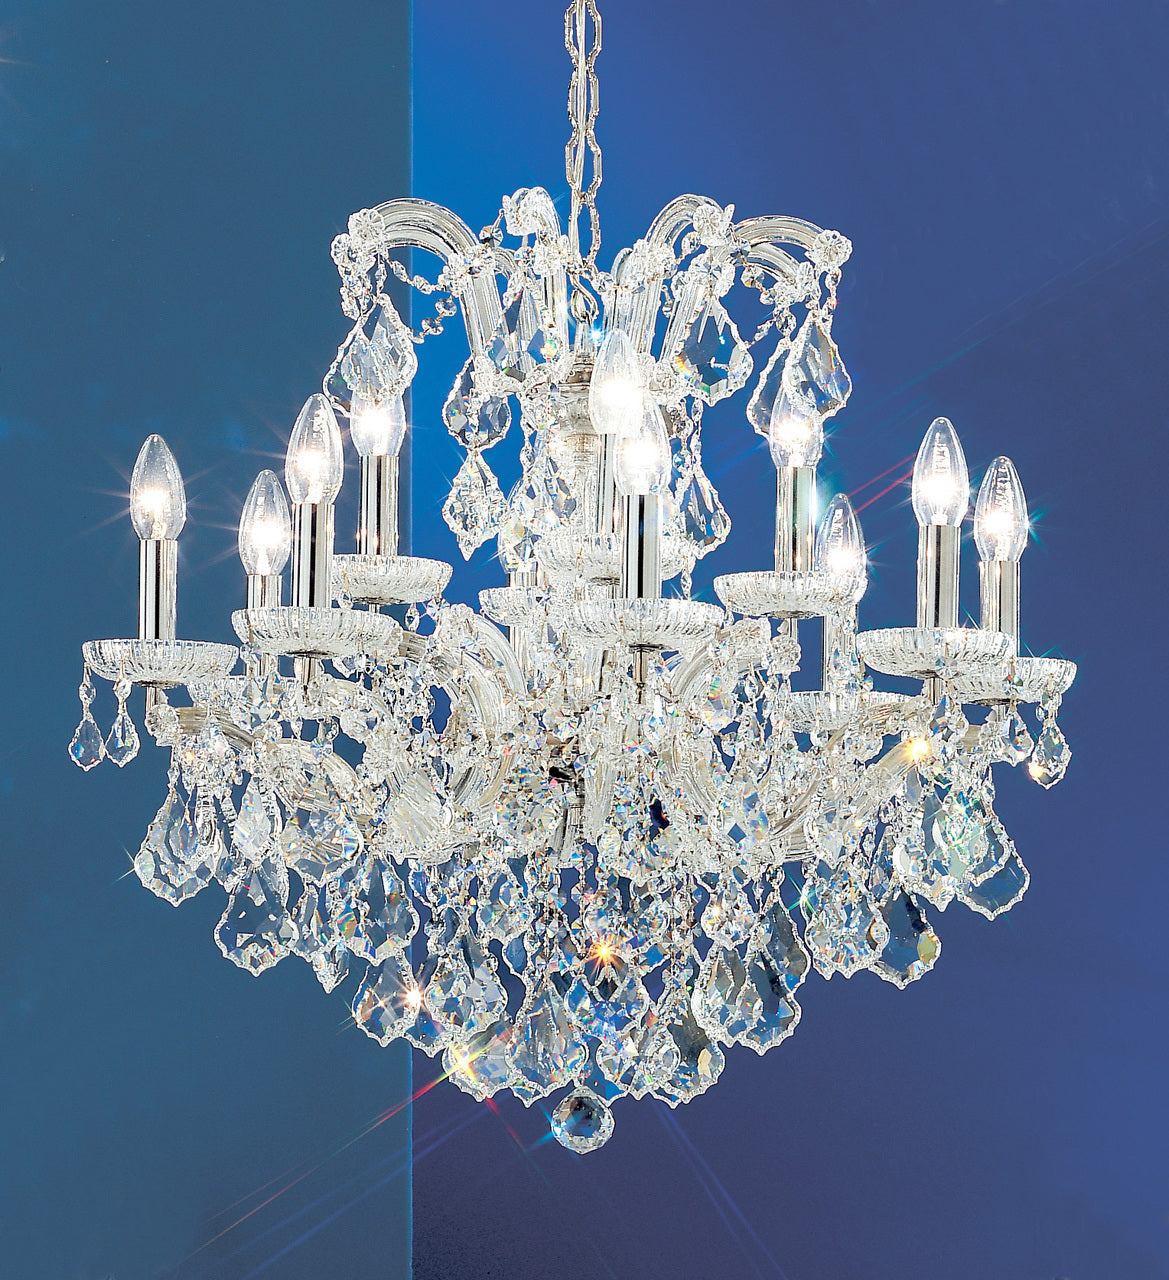 Classic Lighting 8132 OWG S Maria Theresa Traditional Crystal Chandelier in Olde World Gold (Imported from Italy)